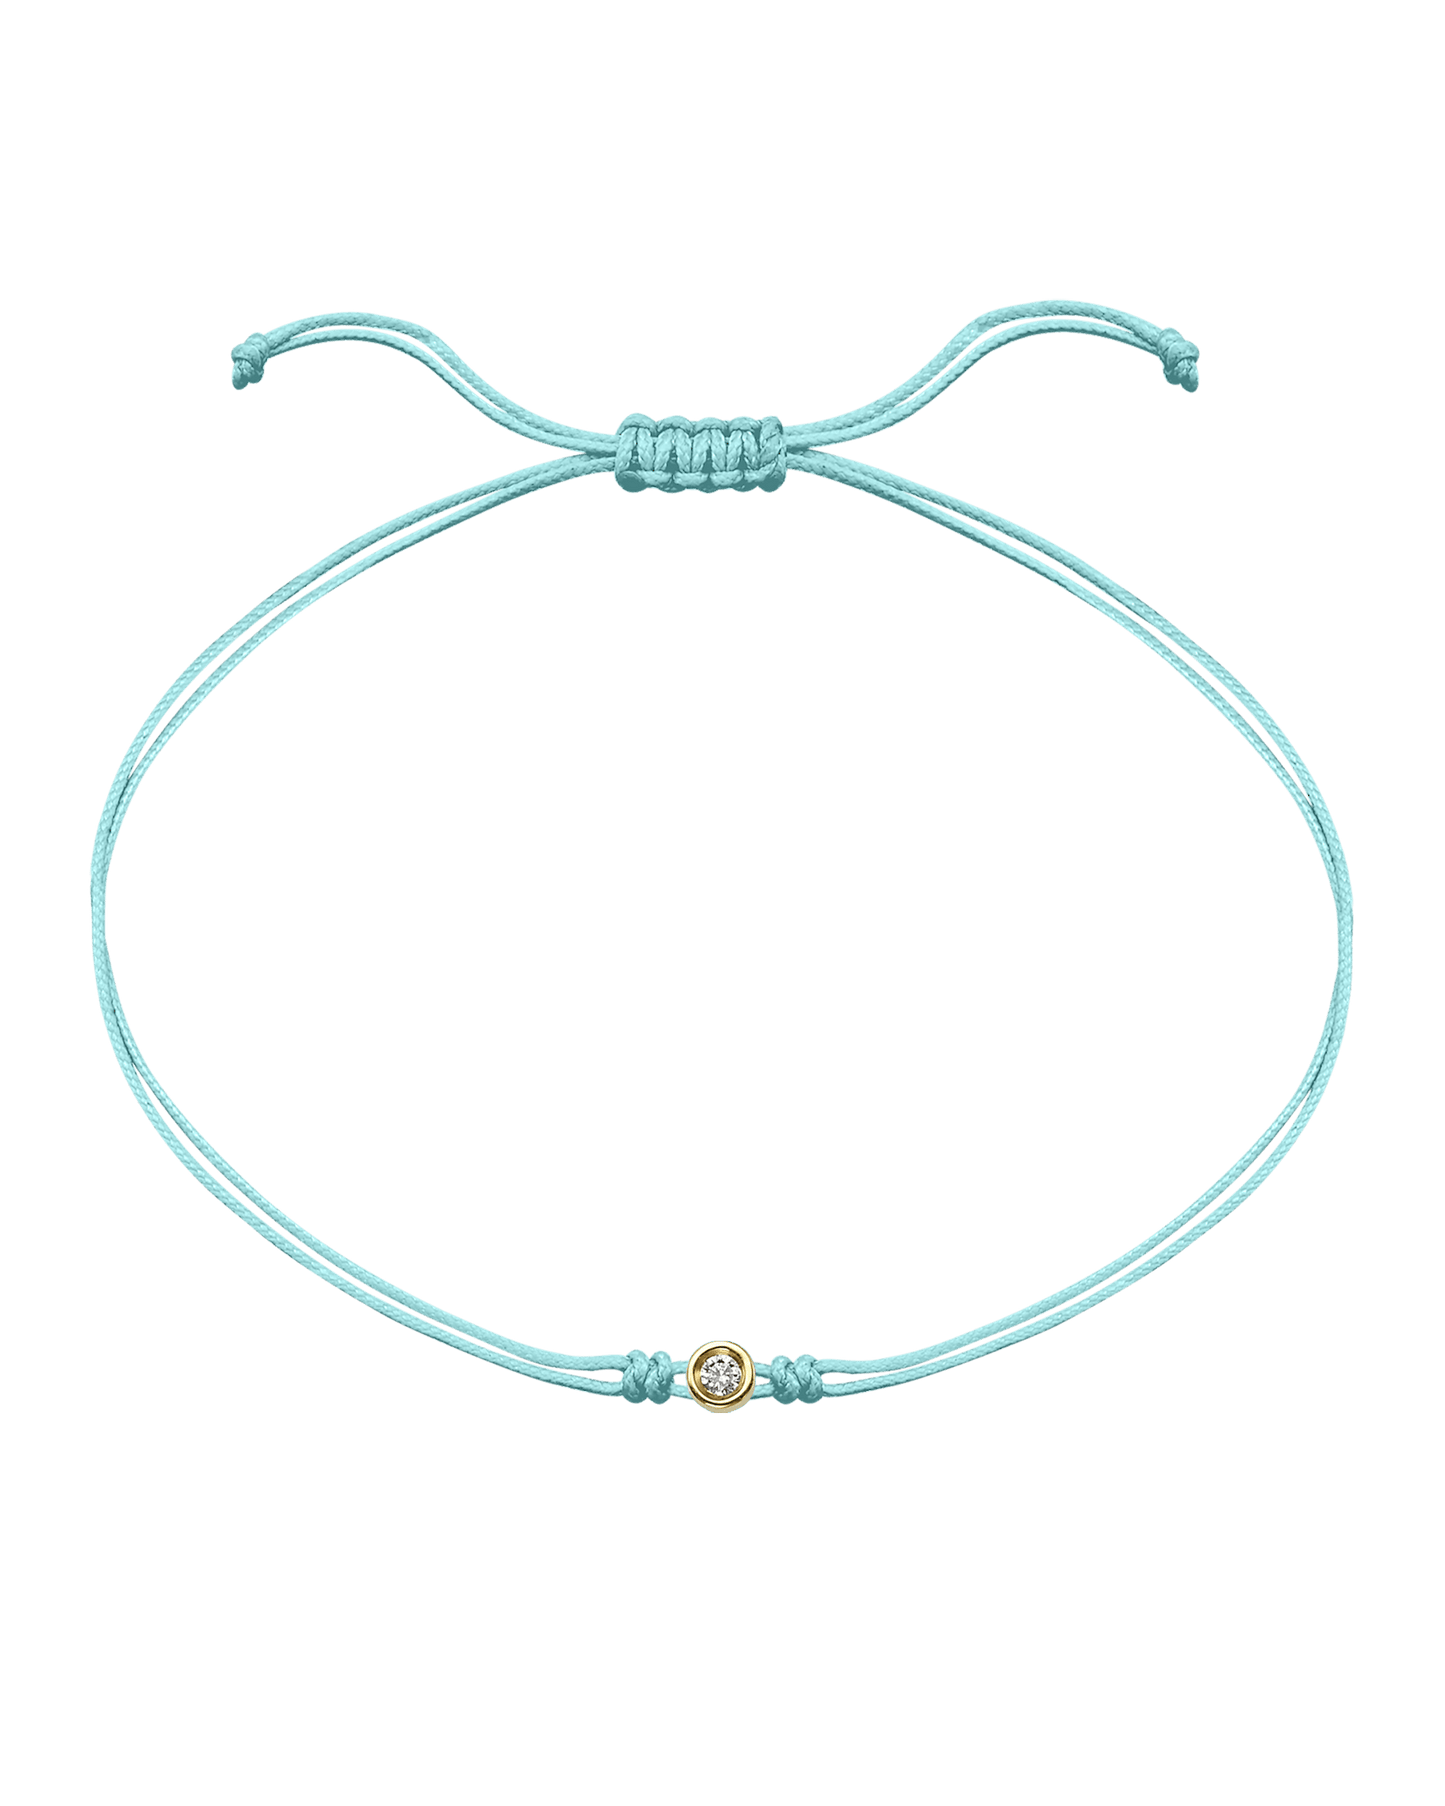 Summer Edition : The Classic String of Love - 14K Yellow Gold Bracelets magal-dev Frozen Blue Daiquiri - Turquoise Small: 0.03ct 